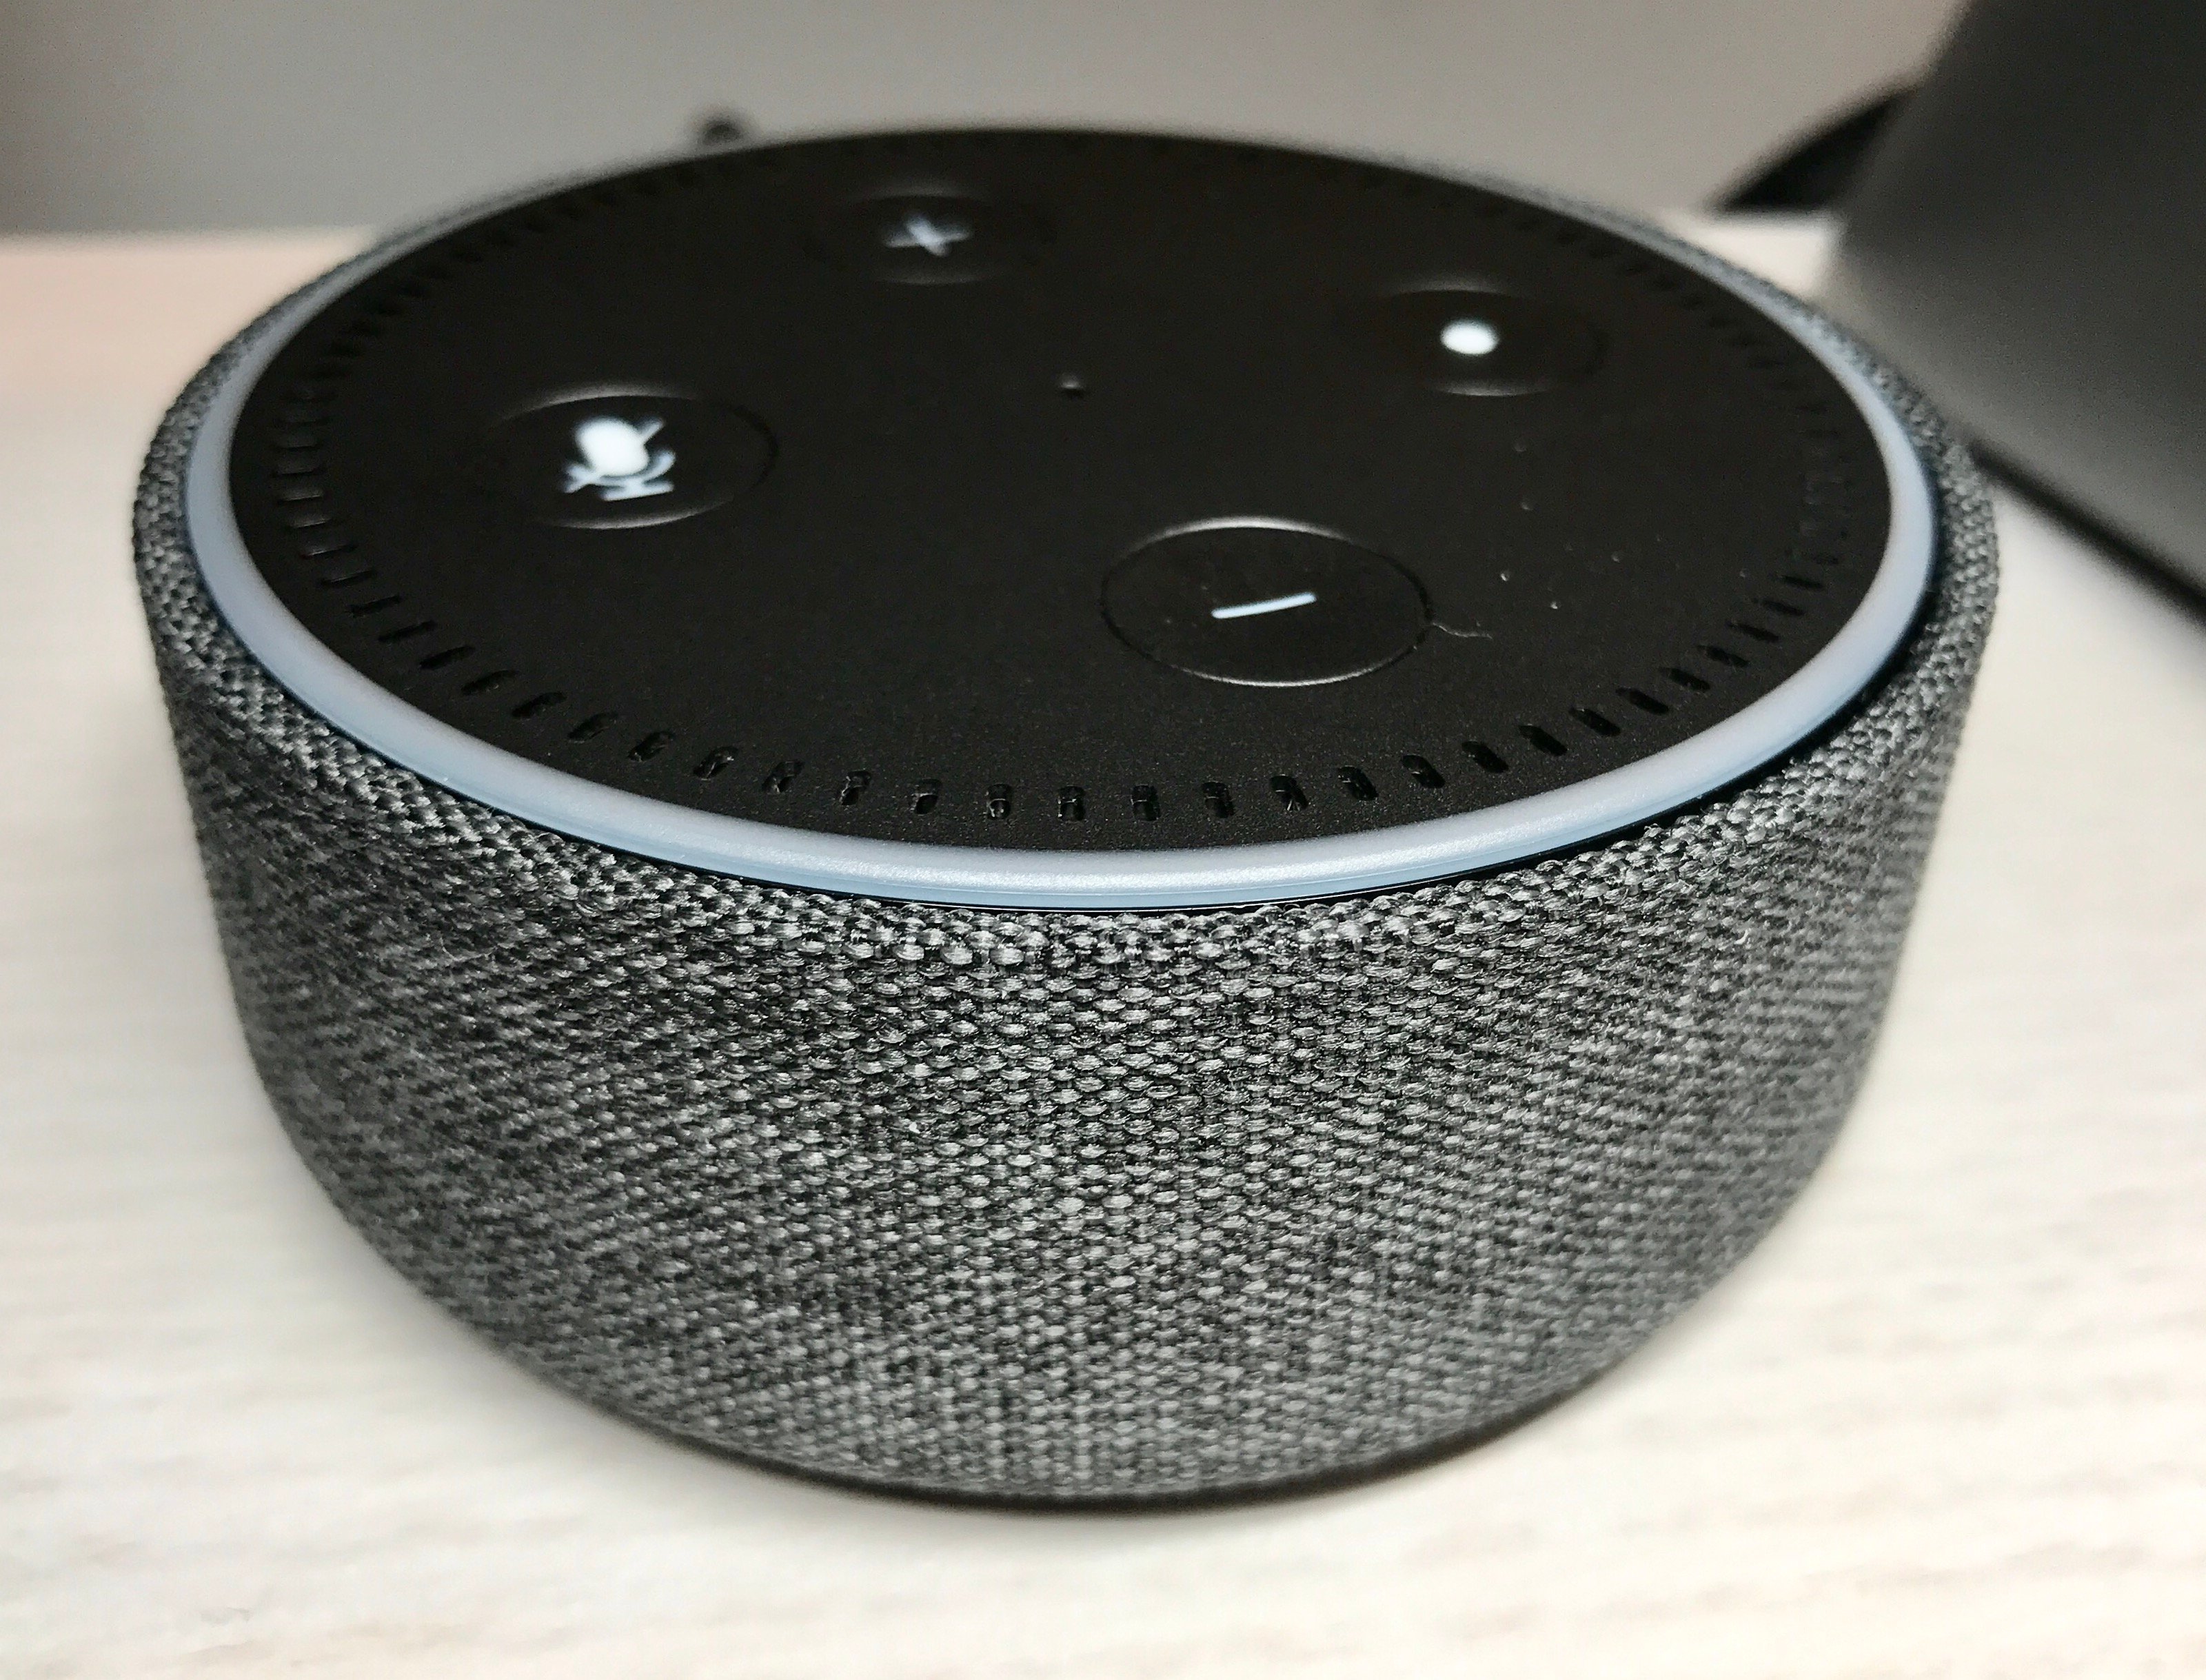 How to change the Echo or Echo Dot wake word from Alexa.